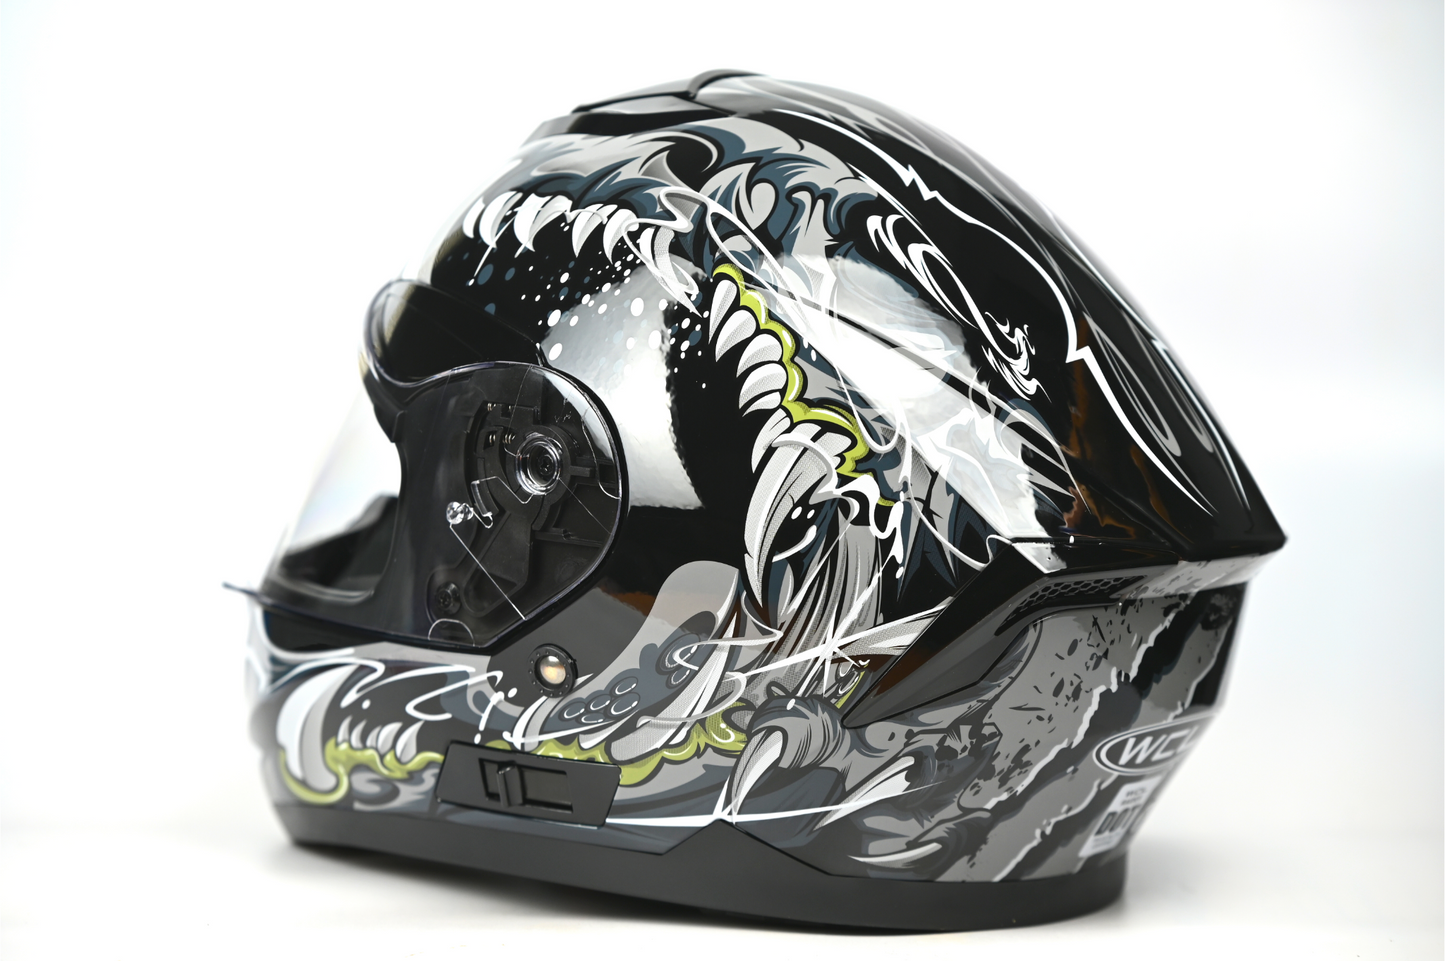 WCL Raider Full Face Motorcycle Helmet - Drop Down Tinted Visor, Quick Release Buckle, DOT Approved - Grey Black WCL Helmet